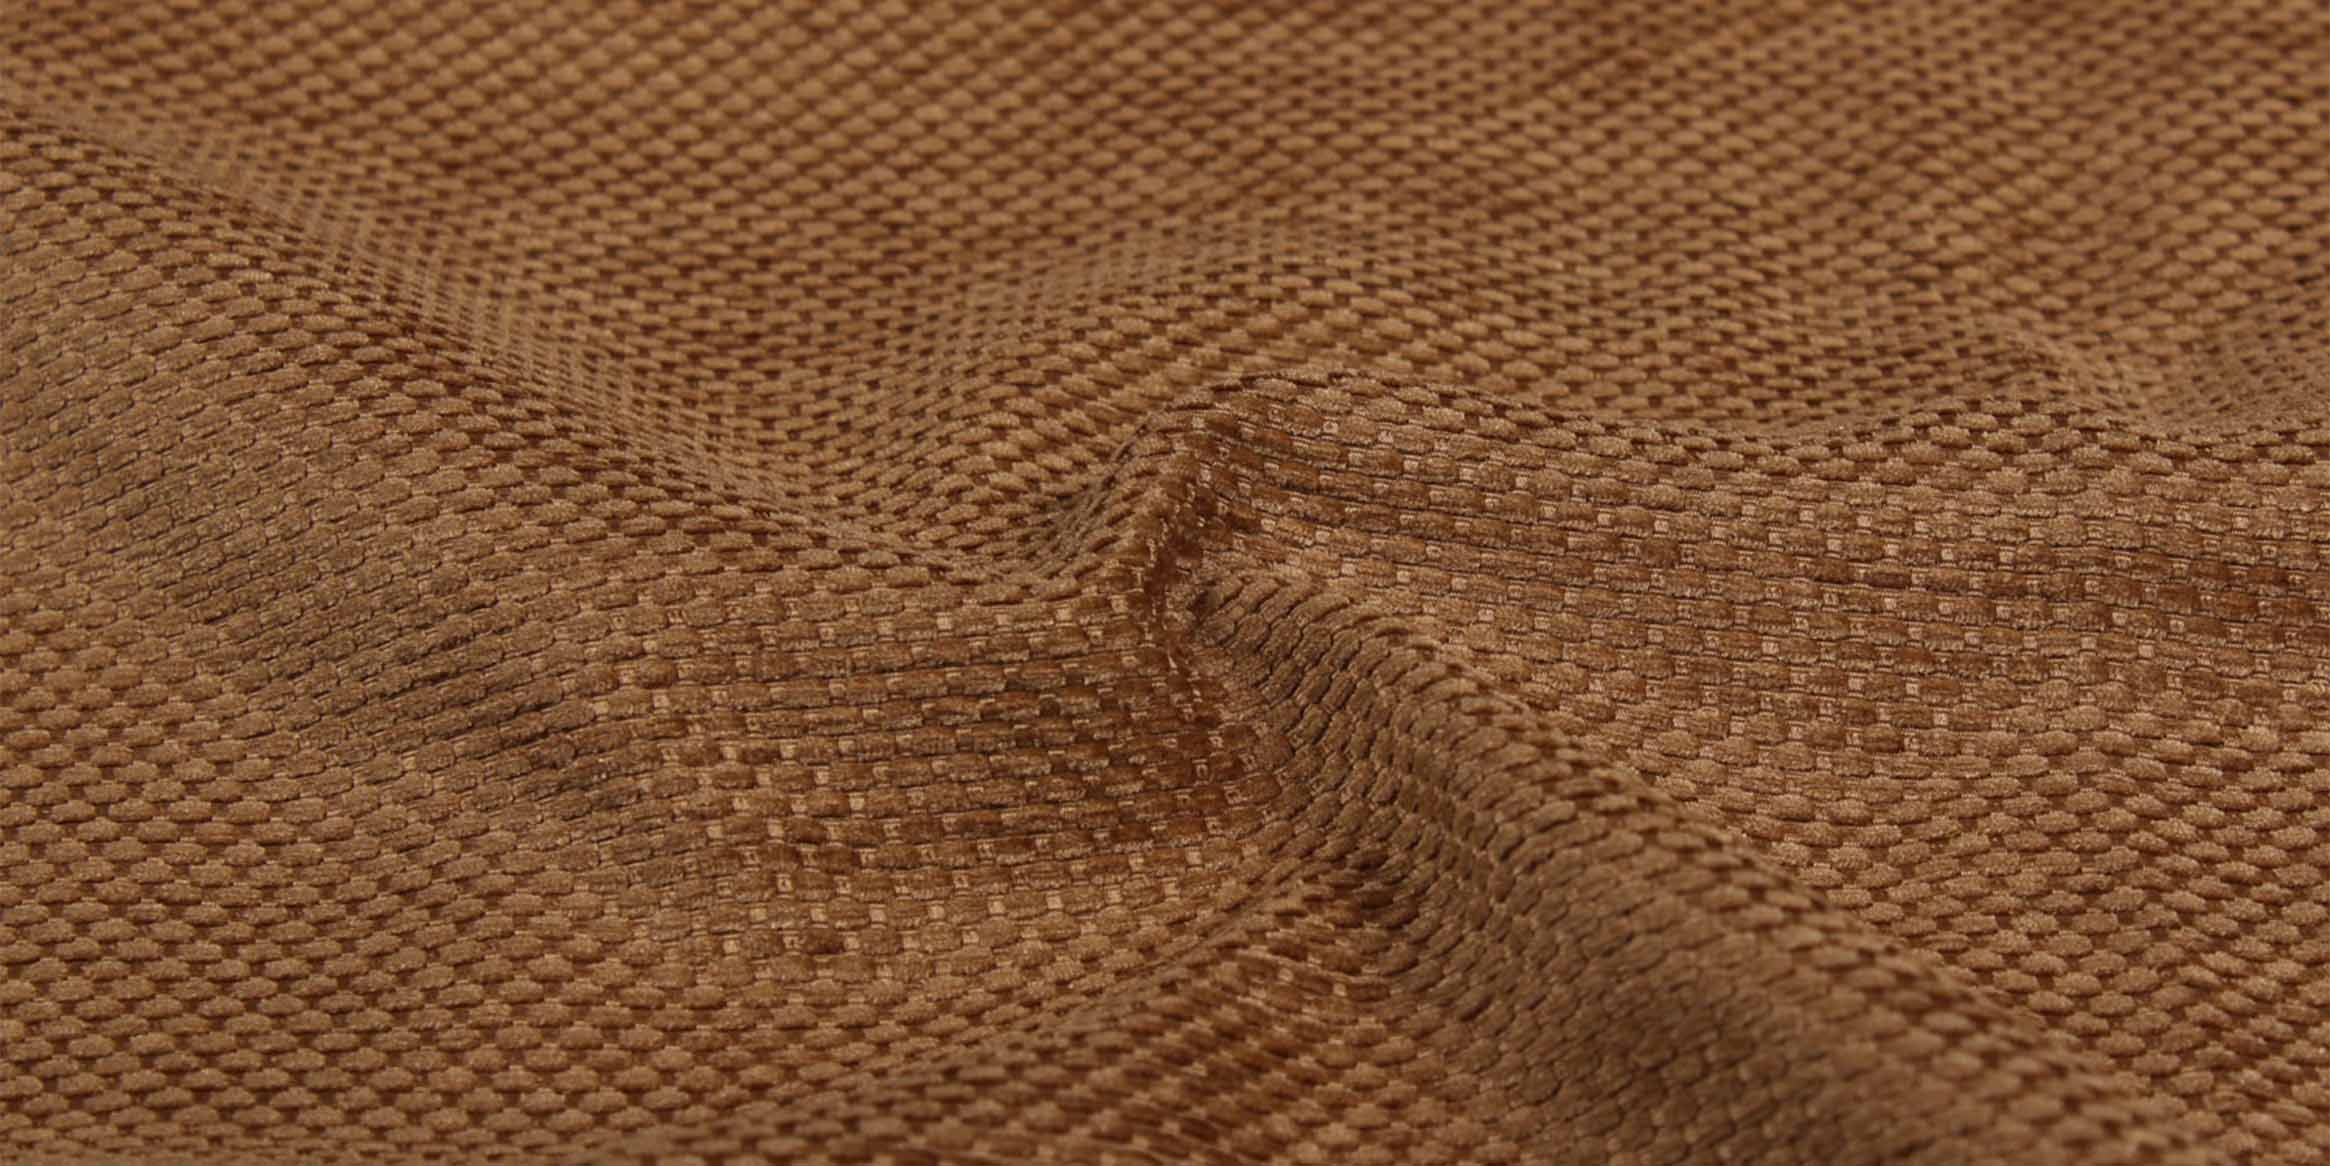 Chenille Fabric - Buy Chenille Upholstery Fabric Online at Best Price